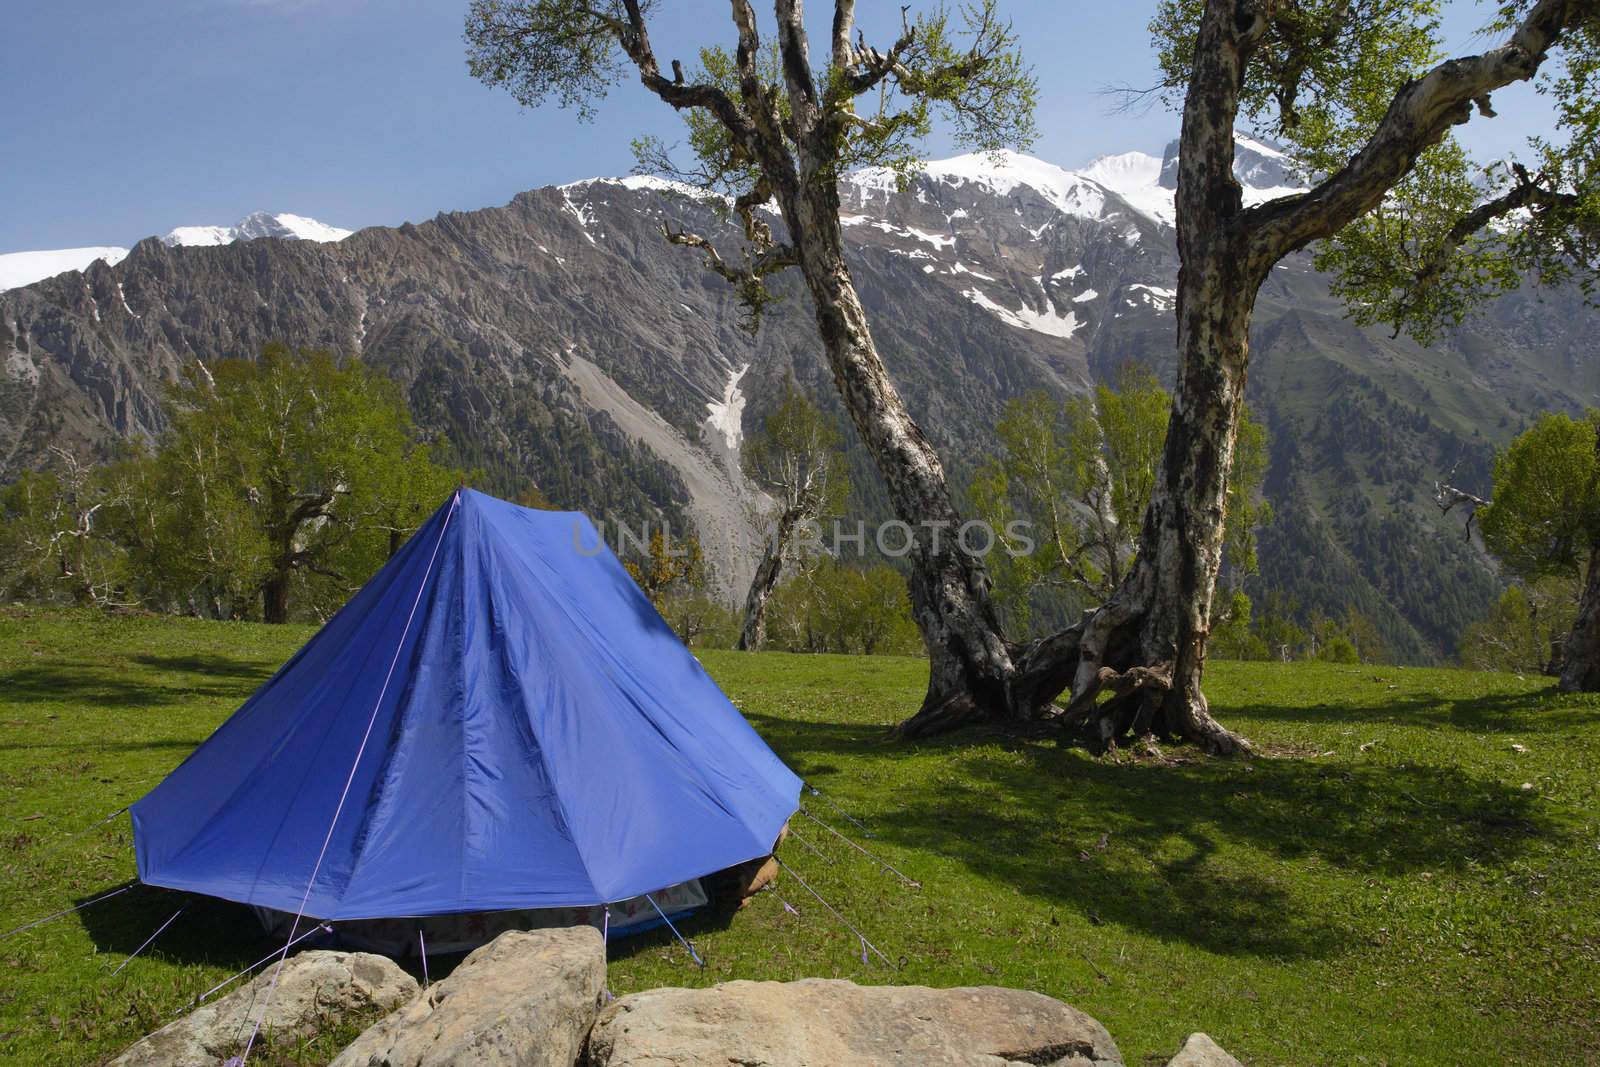 Tent in the mountains by sumners